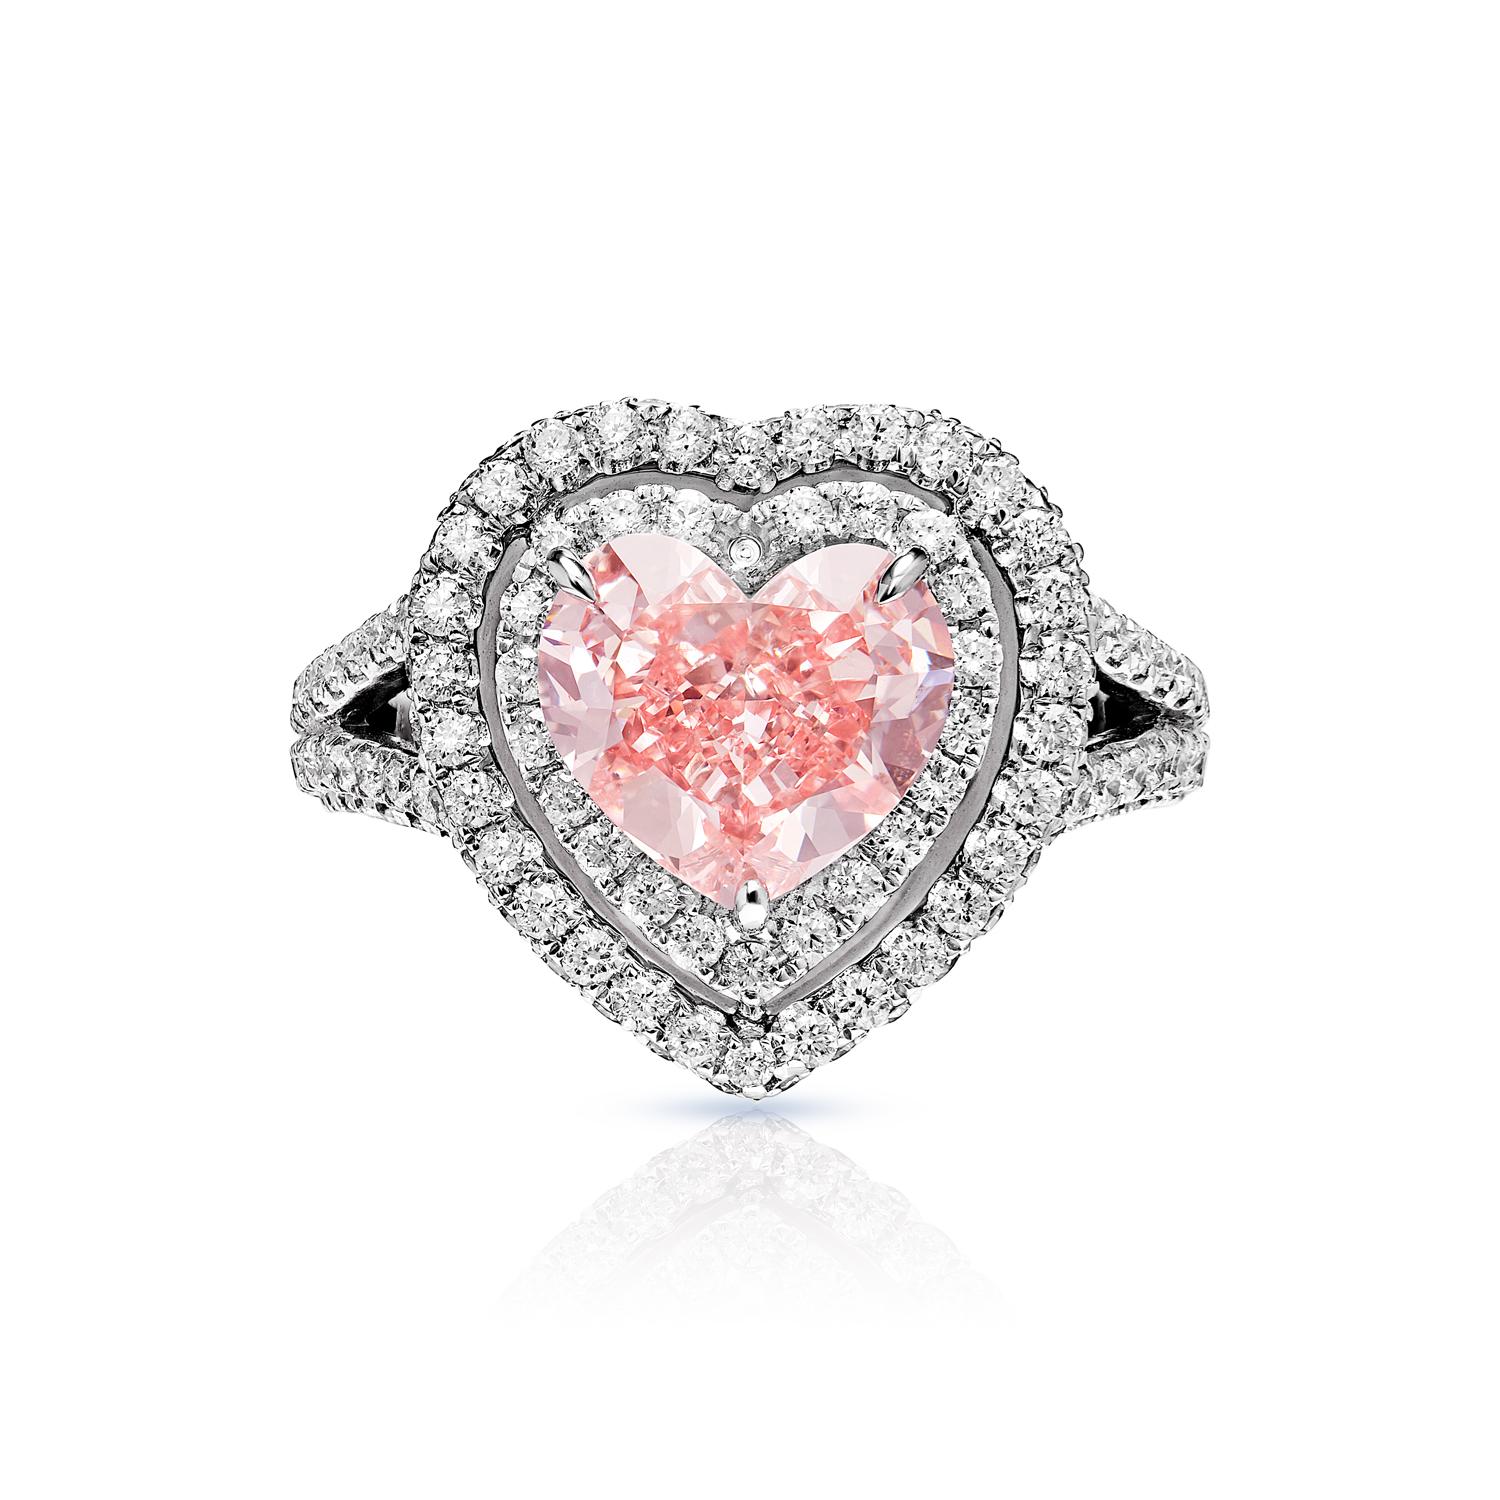 This heart-shaped ring is a gorgeous piece of jewelry that features high-quality 18-karat white gold and a stunning 2.42-carat diamond in the shape of a heart. This beautiful diamond is set in a simple yet elegant setting and has been graded as SI1,